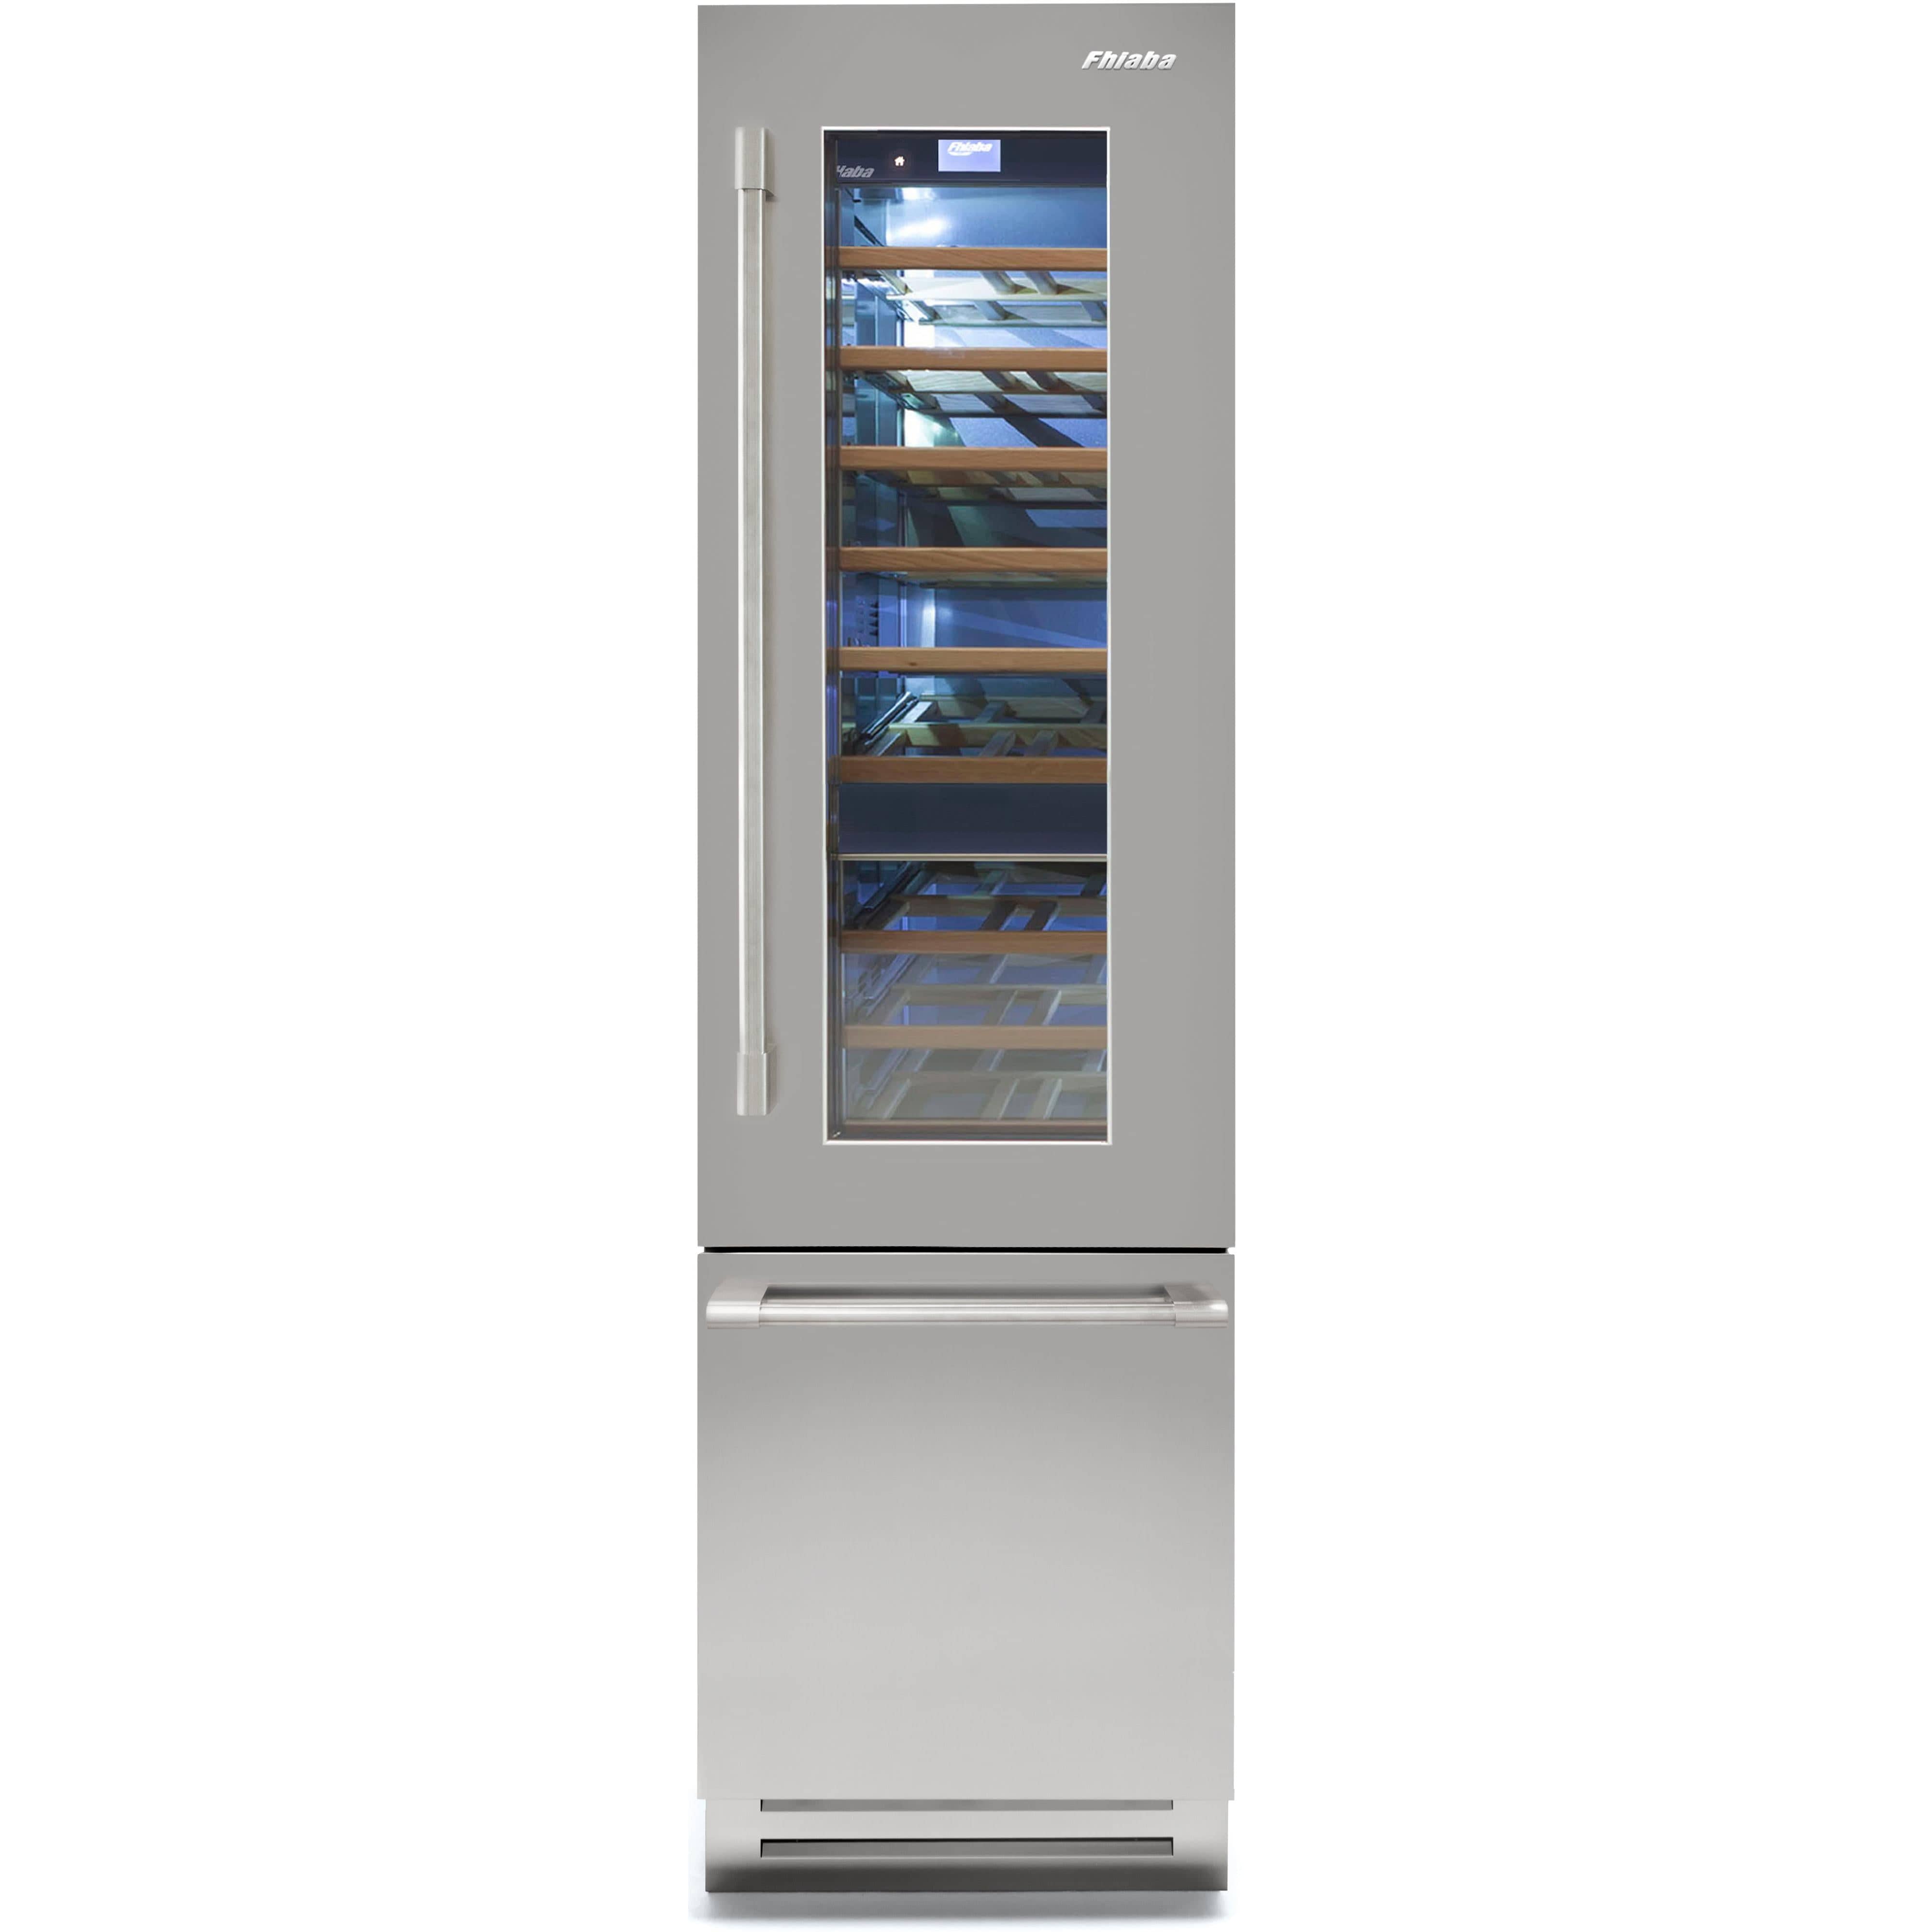 Fhiaba 24-inch Built-in Wine Cellar and Freezer Refrigerator with Smart Touch TFT Display FK24BWR-RGS1 Refrigerators FK24BWRRGS1 Luxury Appliances Direct